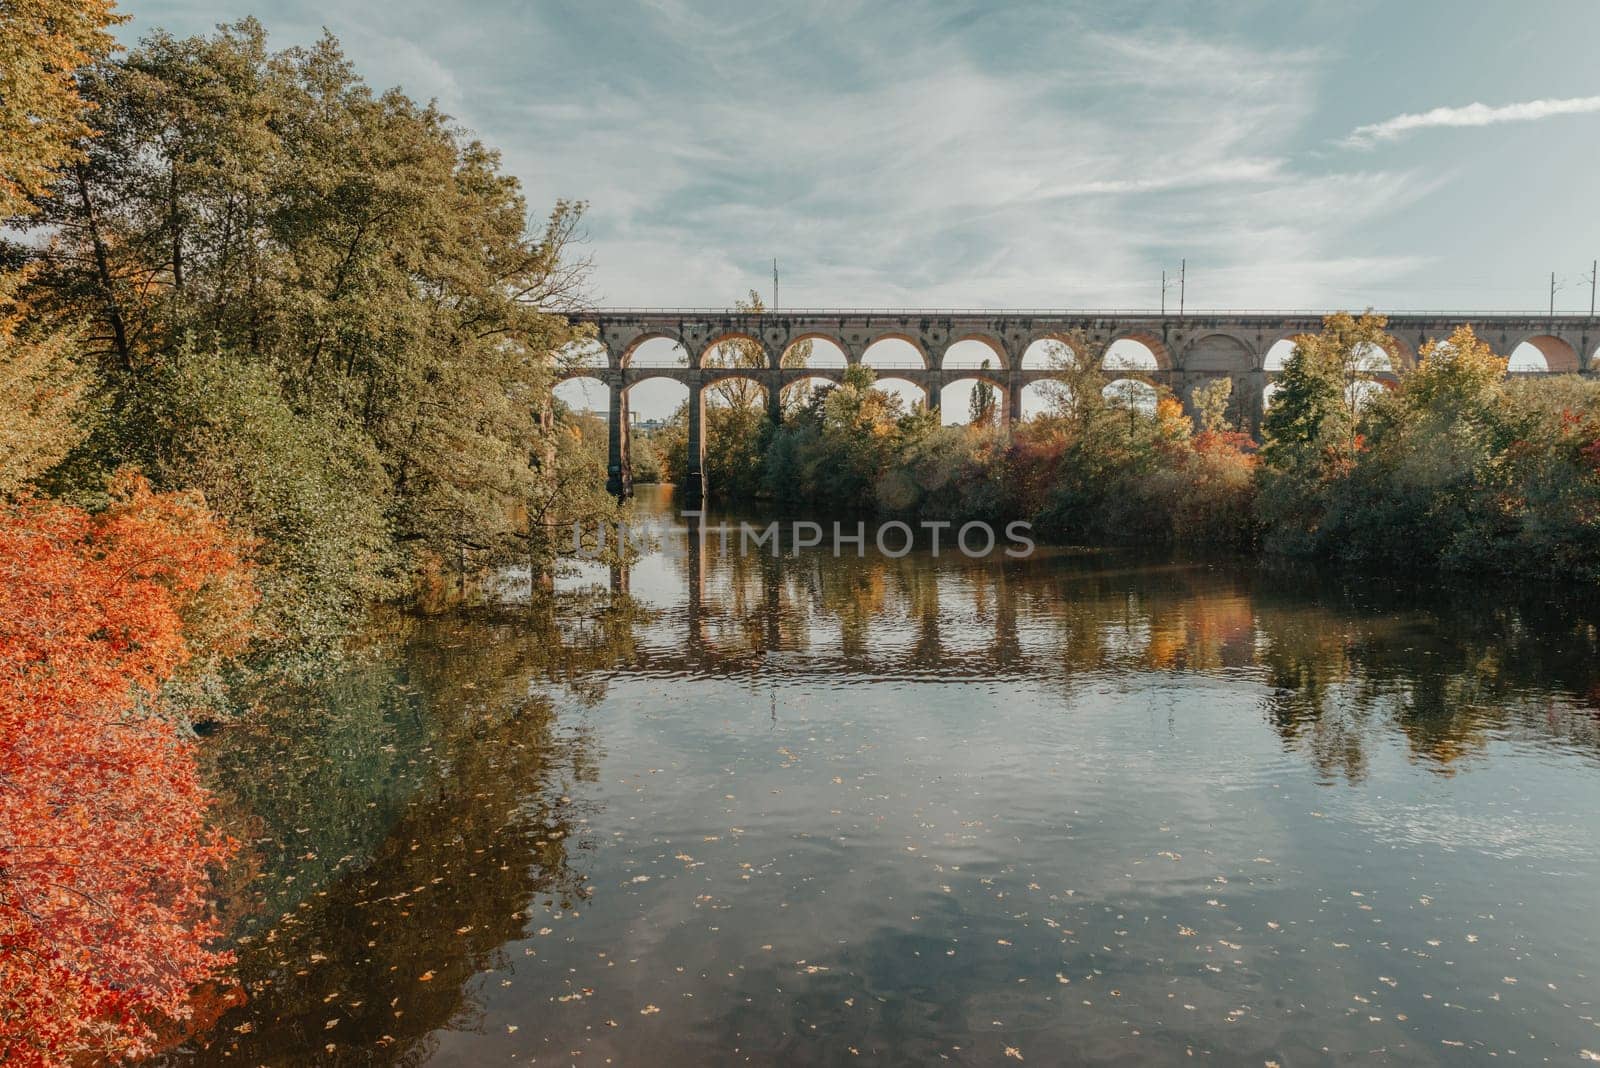 Railway Bridge with river in Bietigheim-Bissingen, Germany. Autumn. Railway viaduct over the Enz River, built in 1853 by Karl von Etzel on a sunny summer day. Bietigheim-Bissingen, Germany. Old viaduct in Bietigheim reflected in the river. Baden-Wurttemberg, Germany. Train passing a train bridge on a cloudy day in Germany by Andrii_Ko